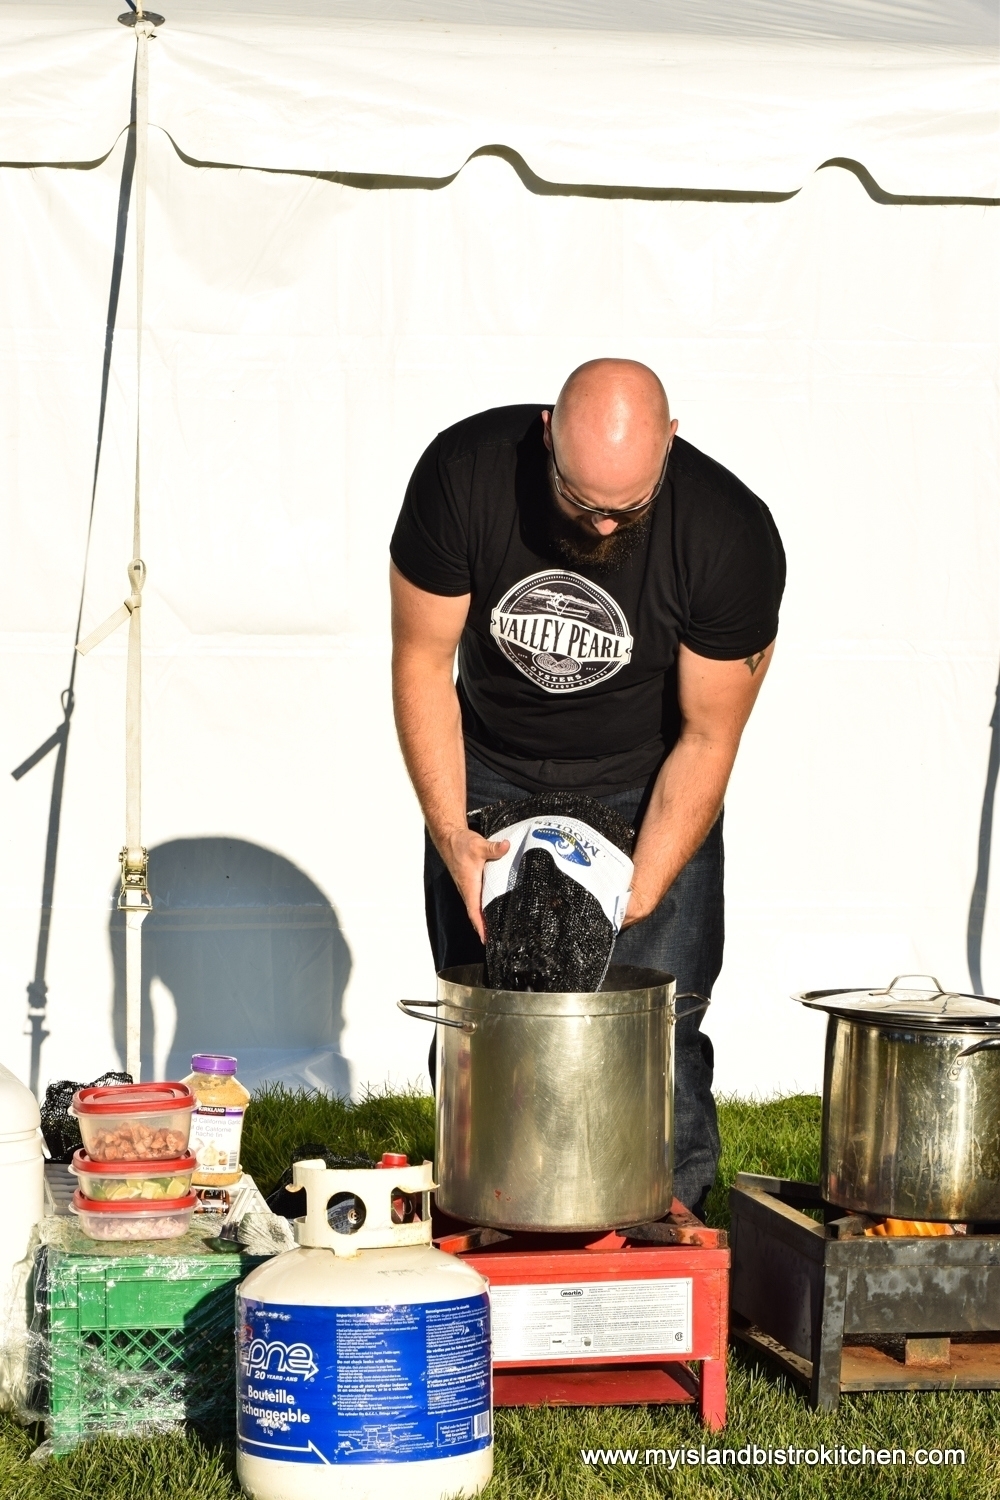 Damien Enman Prepares to Steam PEI Blue Mussels at "Taste of Tyne Valley" PEI Fall Flavours 2017 Event